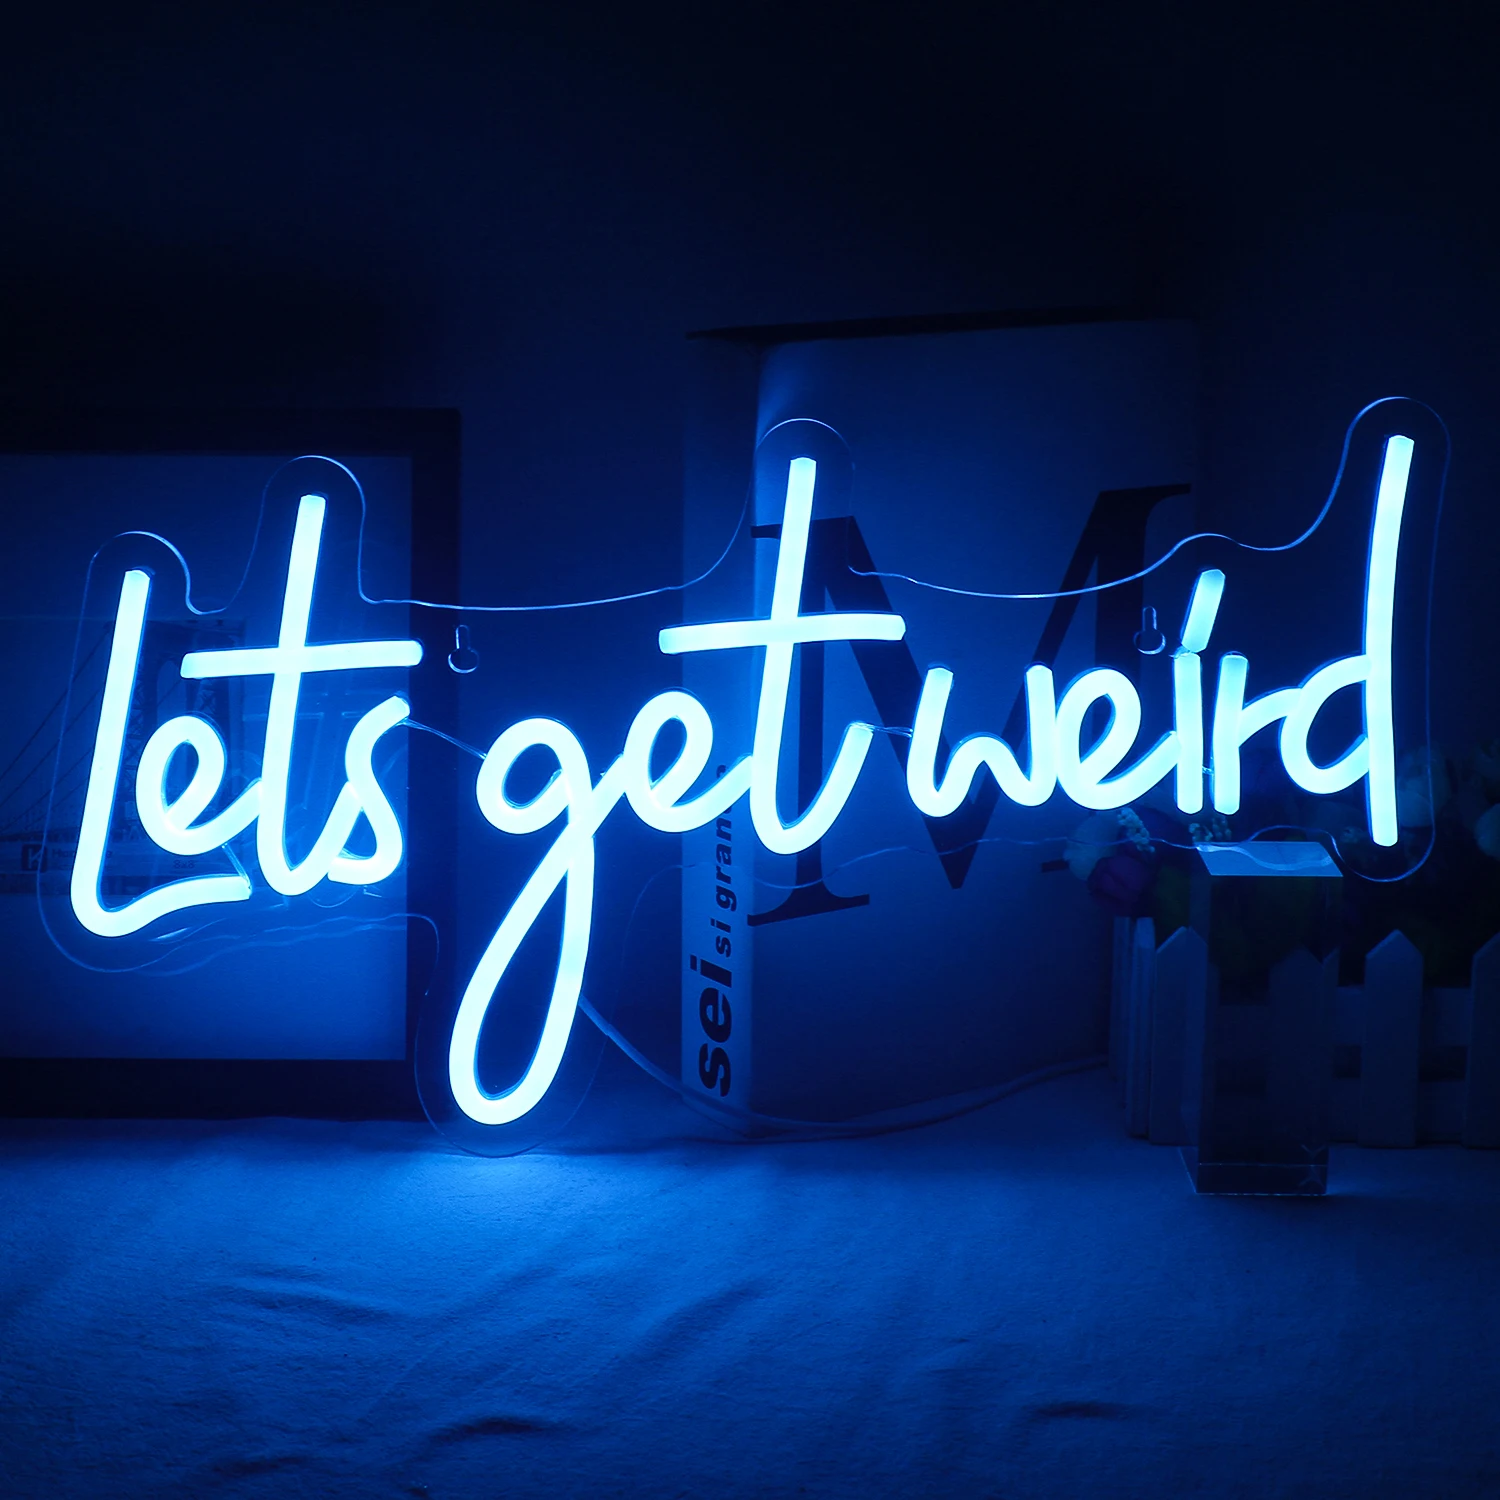 

Wanxing Lets Get Weird Neon Lights LED Sign Neon Inscription Party Bar Aesthetic Gamer Bedroom Wall Decoration Luminiso Lamps